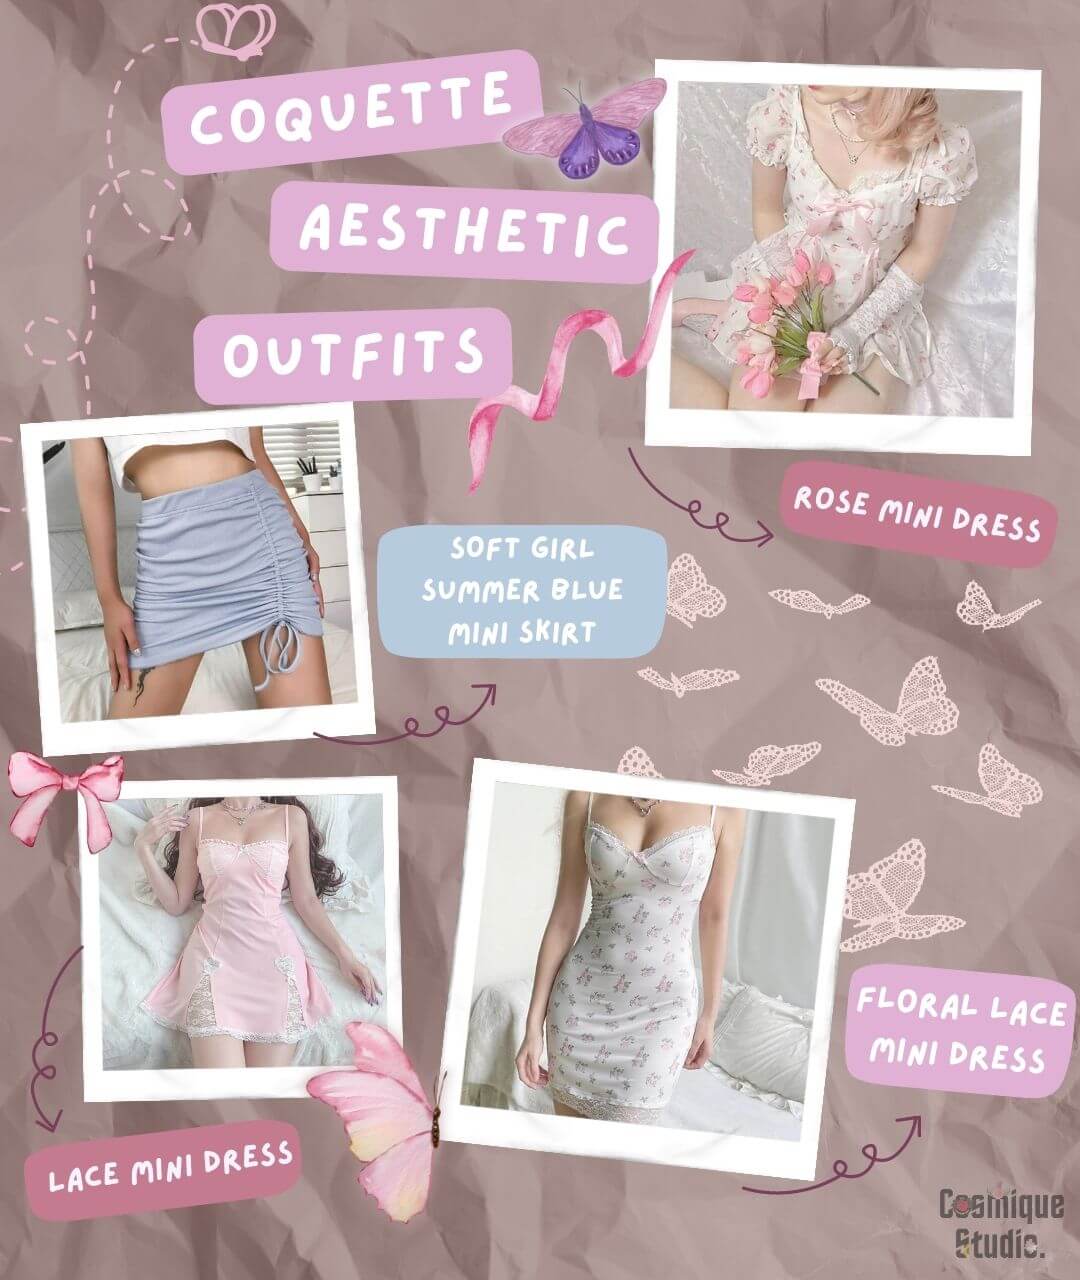 Coquette aesthetic outfits to buy, including lace mini dress, floral lace mini dress, rose mini dress, and soft girl summer blue mini skirt 